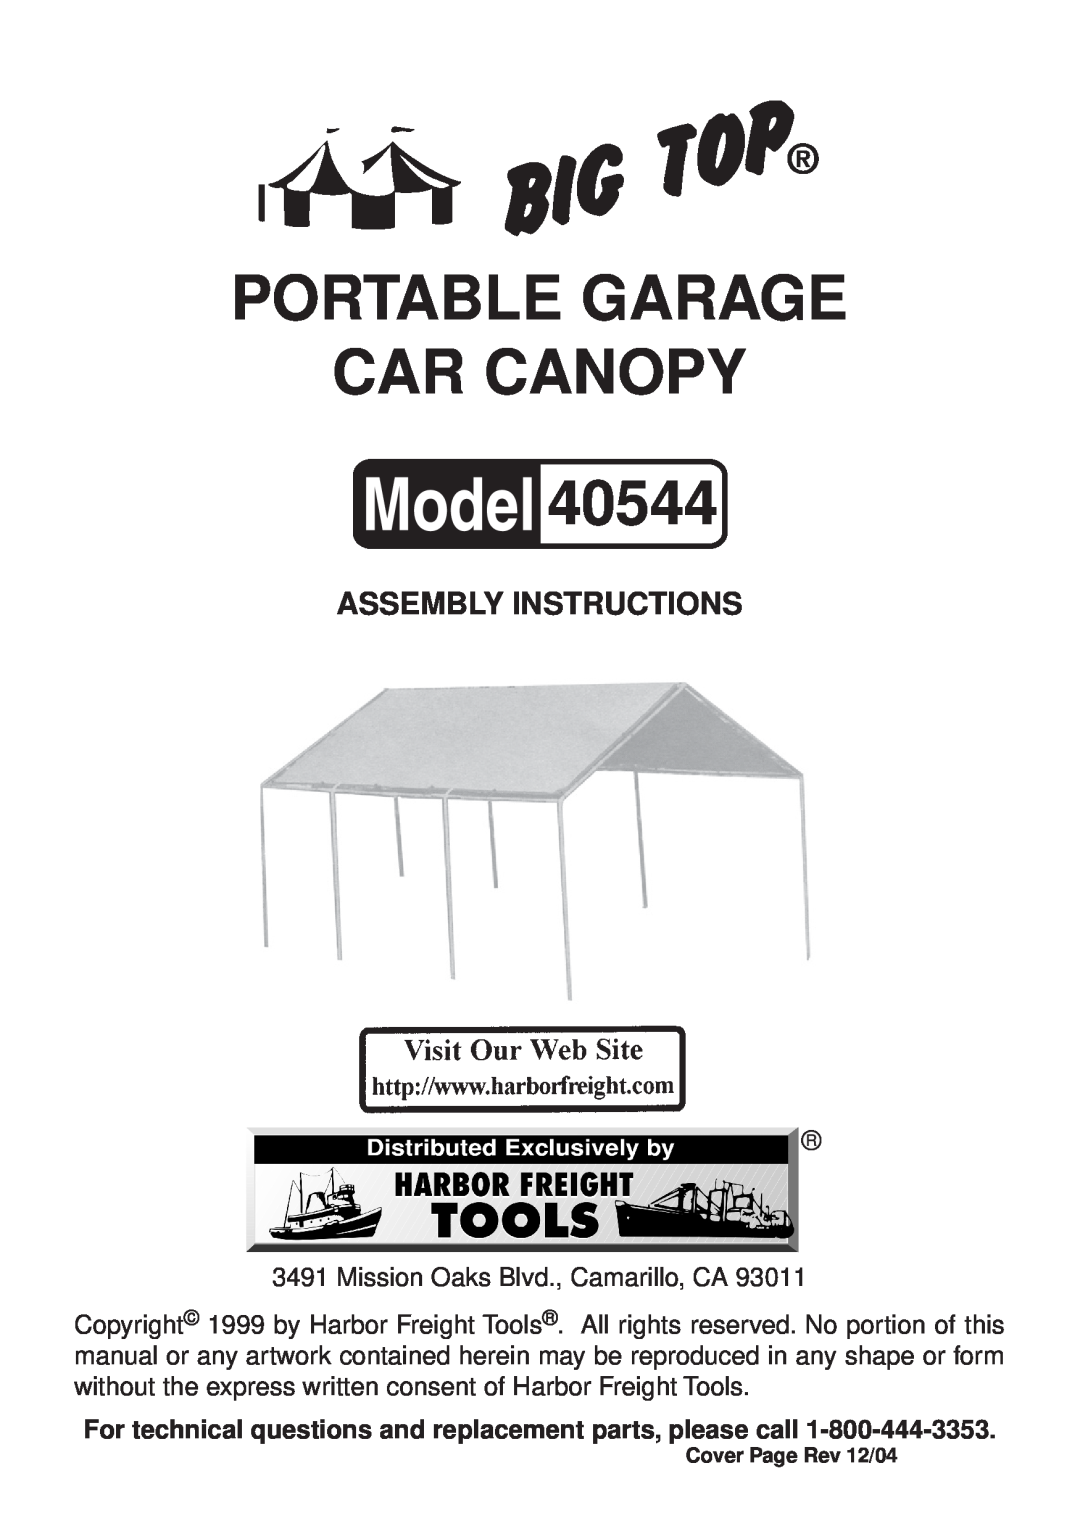 Harbor Freight Tools 40544 manual Assembly Instructions, Portable Garage Car Canopy, Cover Page Rev 12/04 